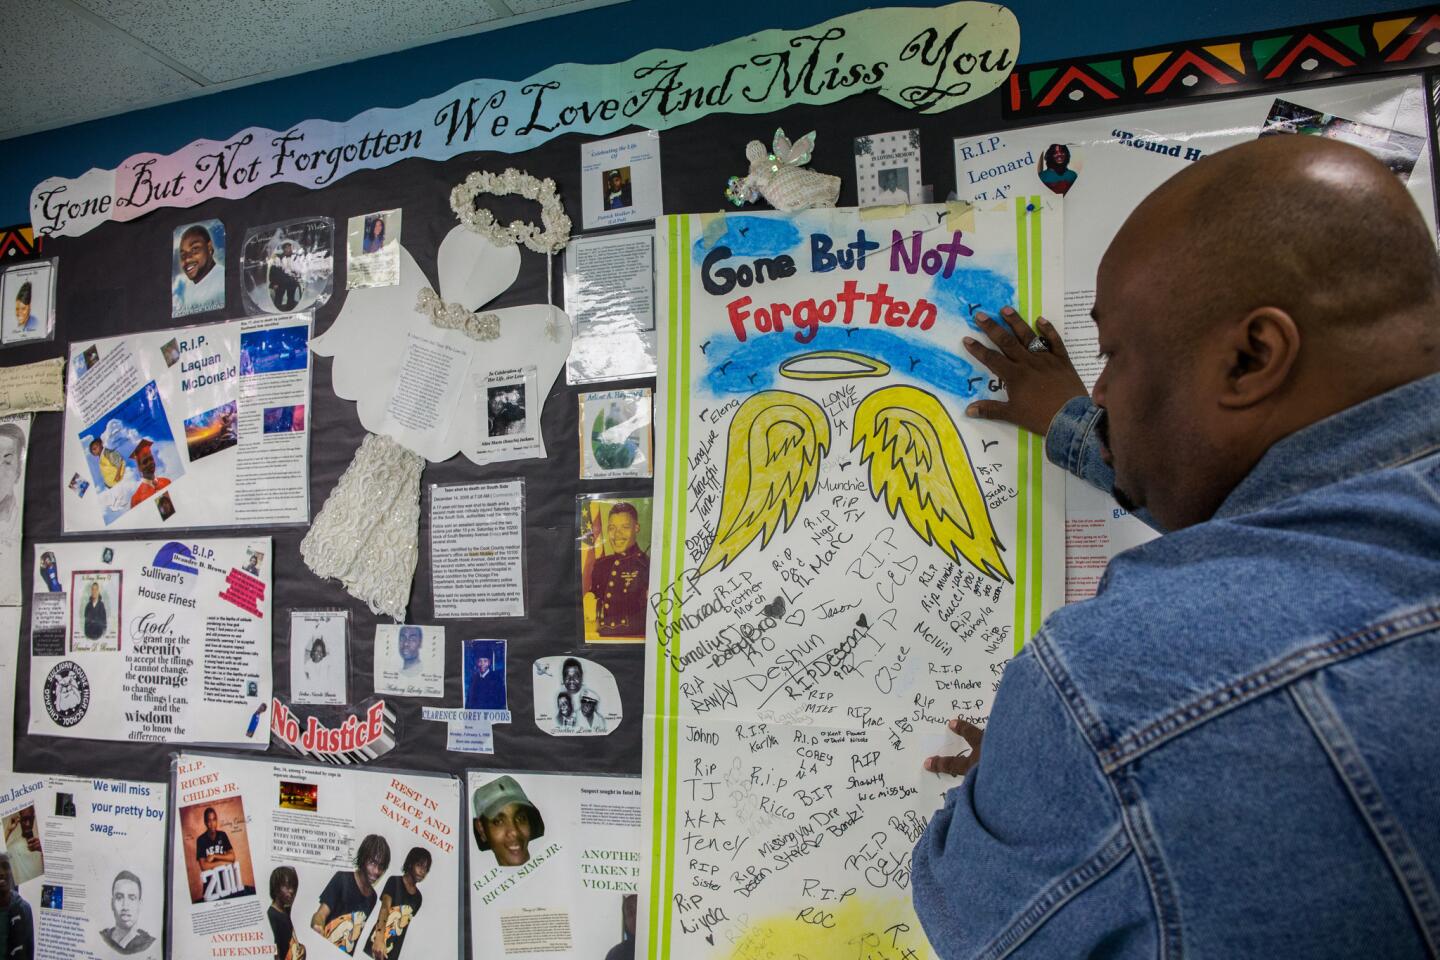 School counselor Darnell Payne adds another panel to a memorial for victims of violence, including 17-year-old Laquan McDonald, at Sullivan House Alternative High School in Chicago on April 17, 2015.